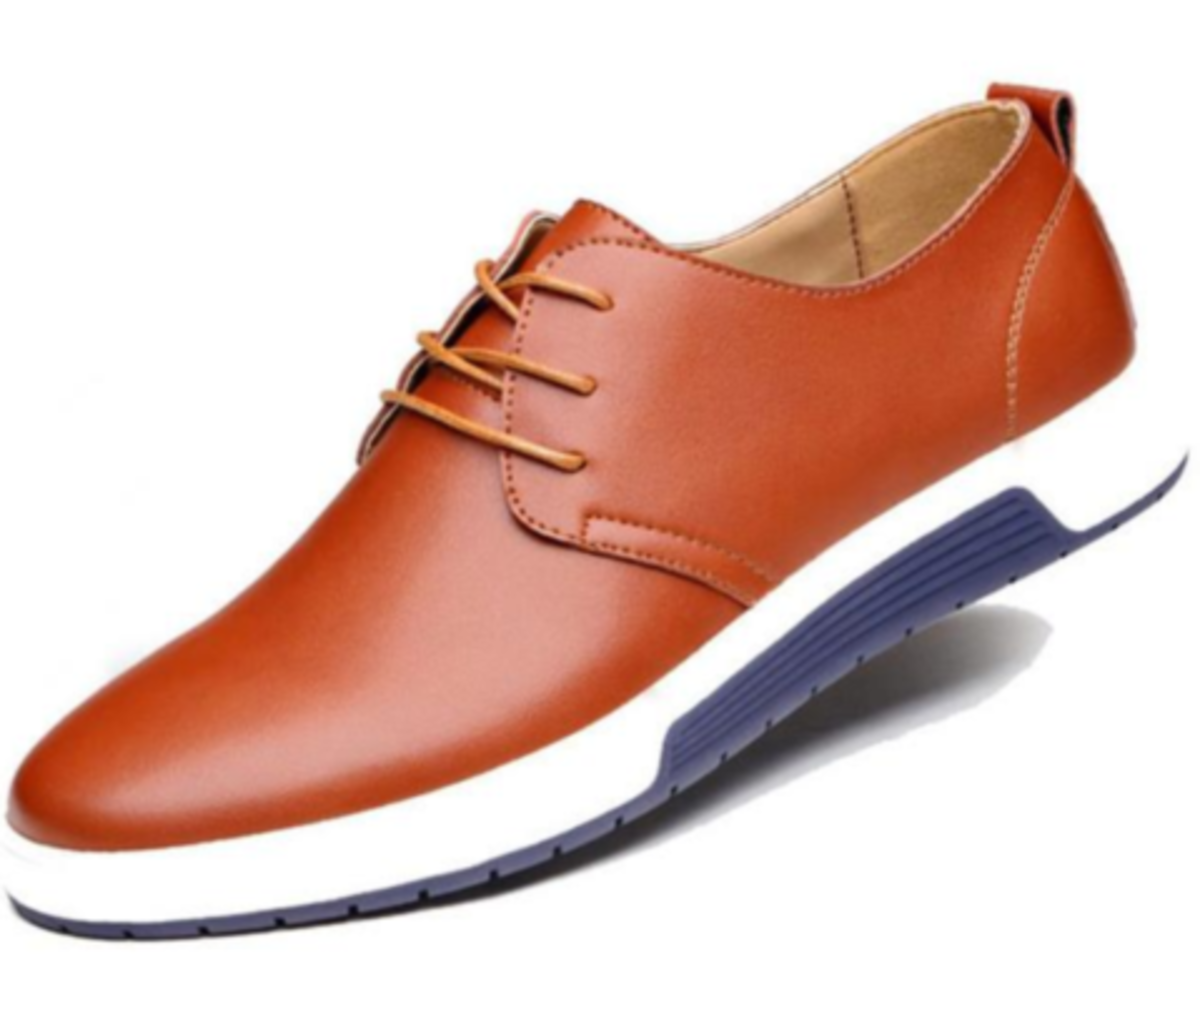 Mens Casual Daily Lace up Leather Shoes